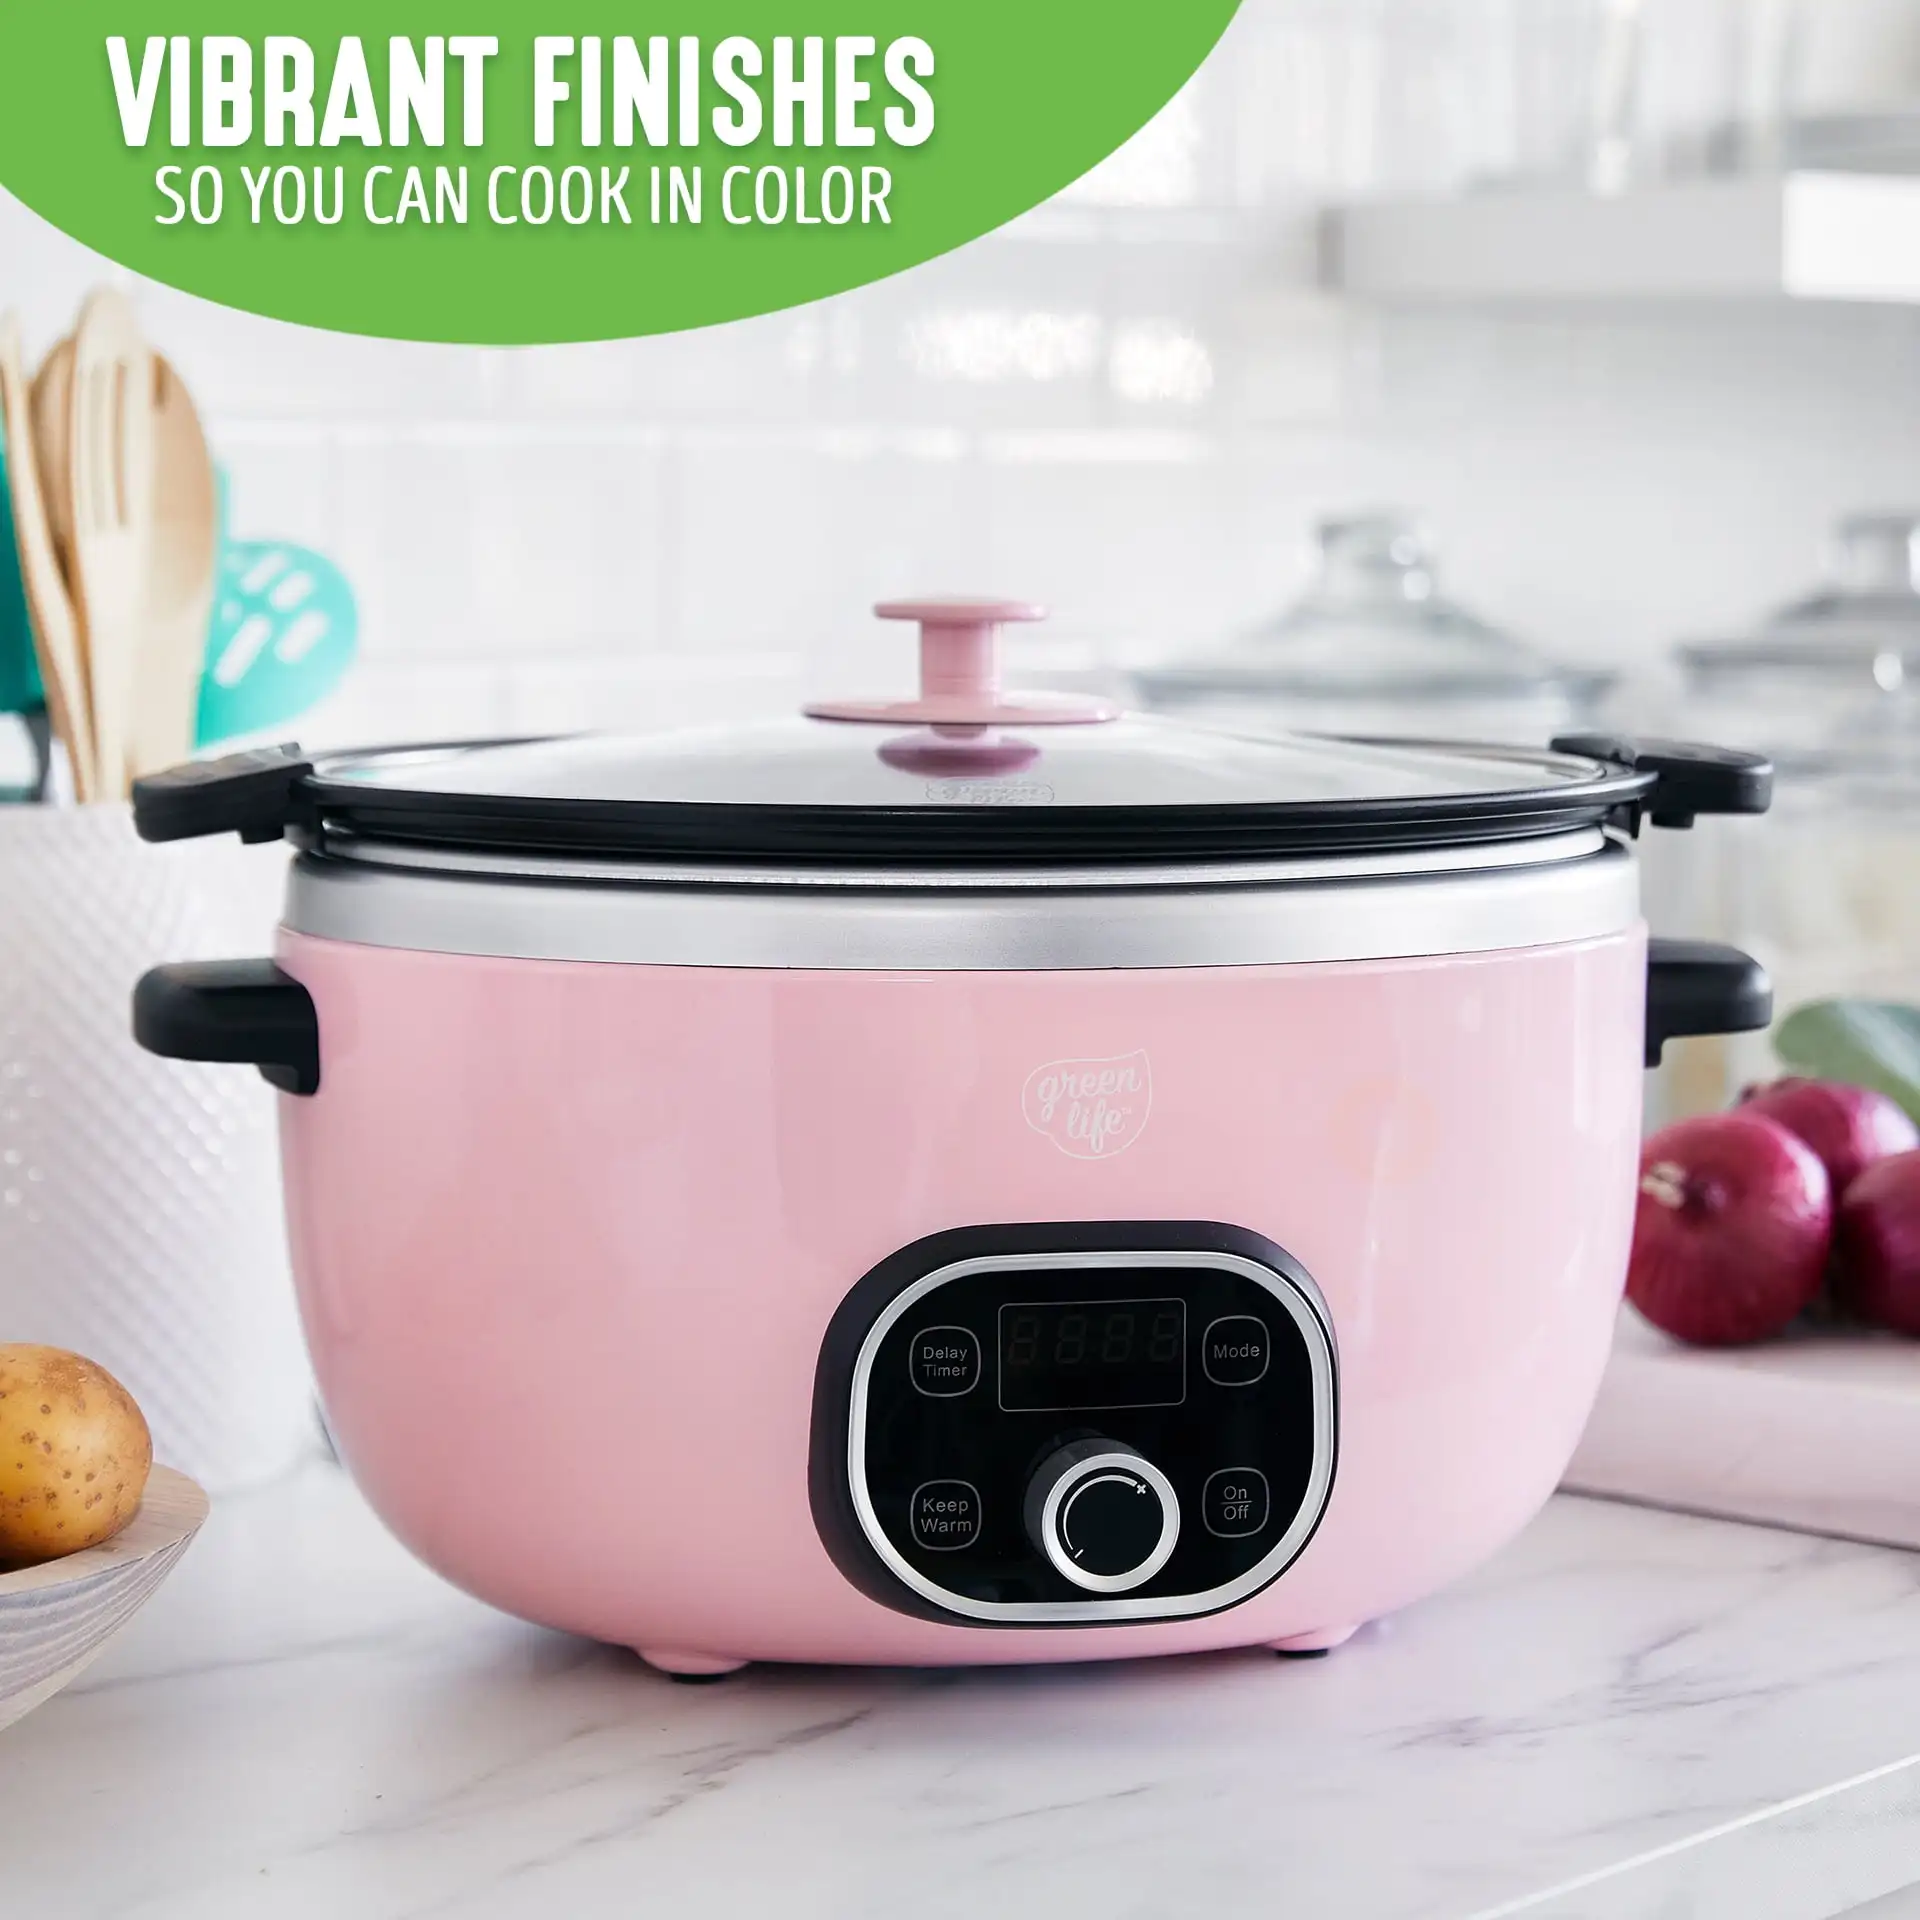 https://ae01.alicdn.com/kf/Sa0a21f1ffa8a45cd946dbe74a0f62d18A/Ceramic-Nonstick-6QT-Slow-Cooker-Pink-Cooking-Home-Appliances-For-Kitchen-Mini-Electric-Cooker-USA-NEW.jpg